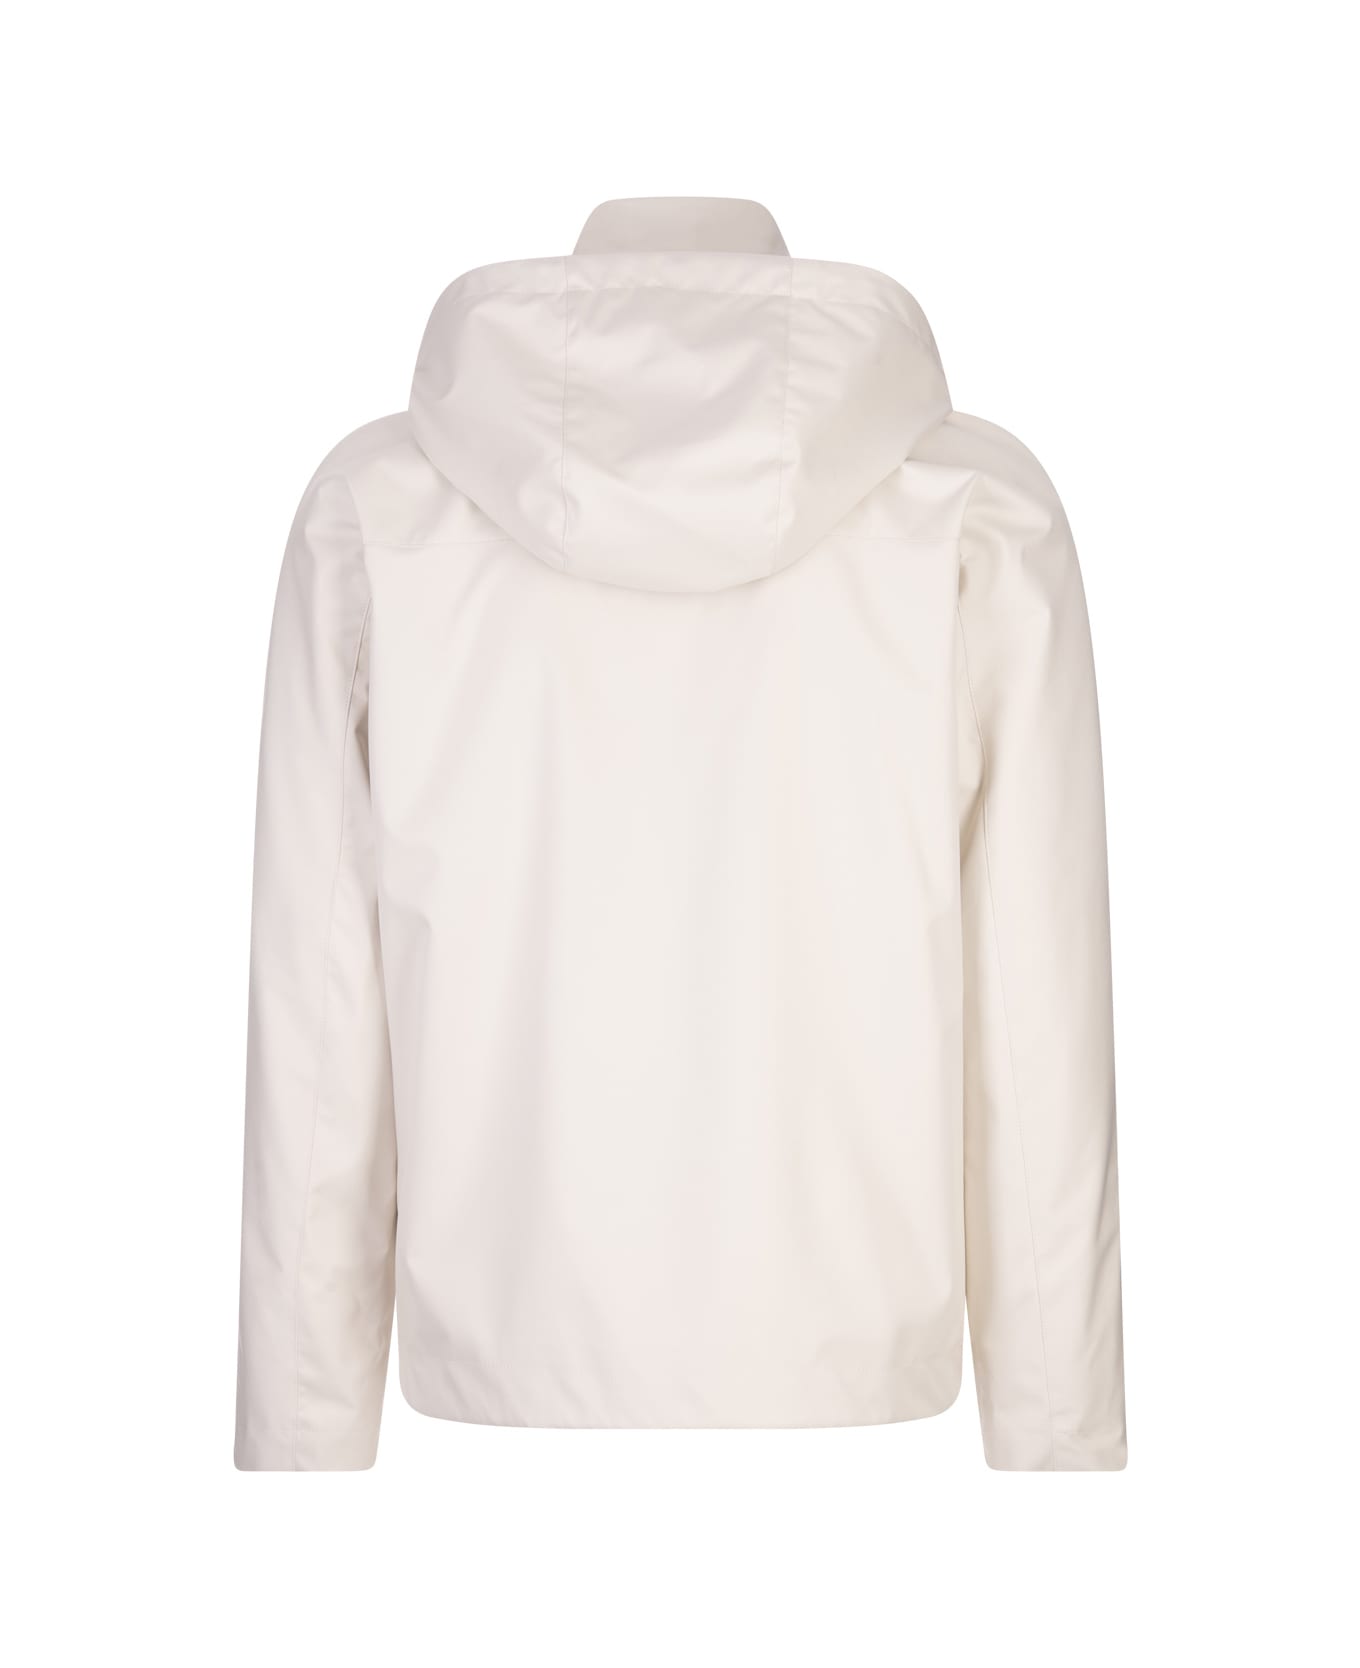 Kiton Lightweight Jacket In White Technical Fabric - White